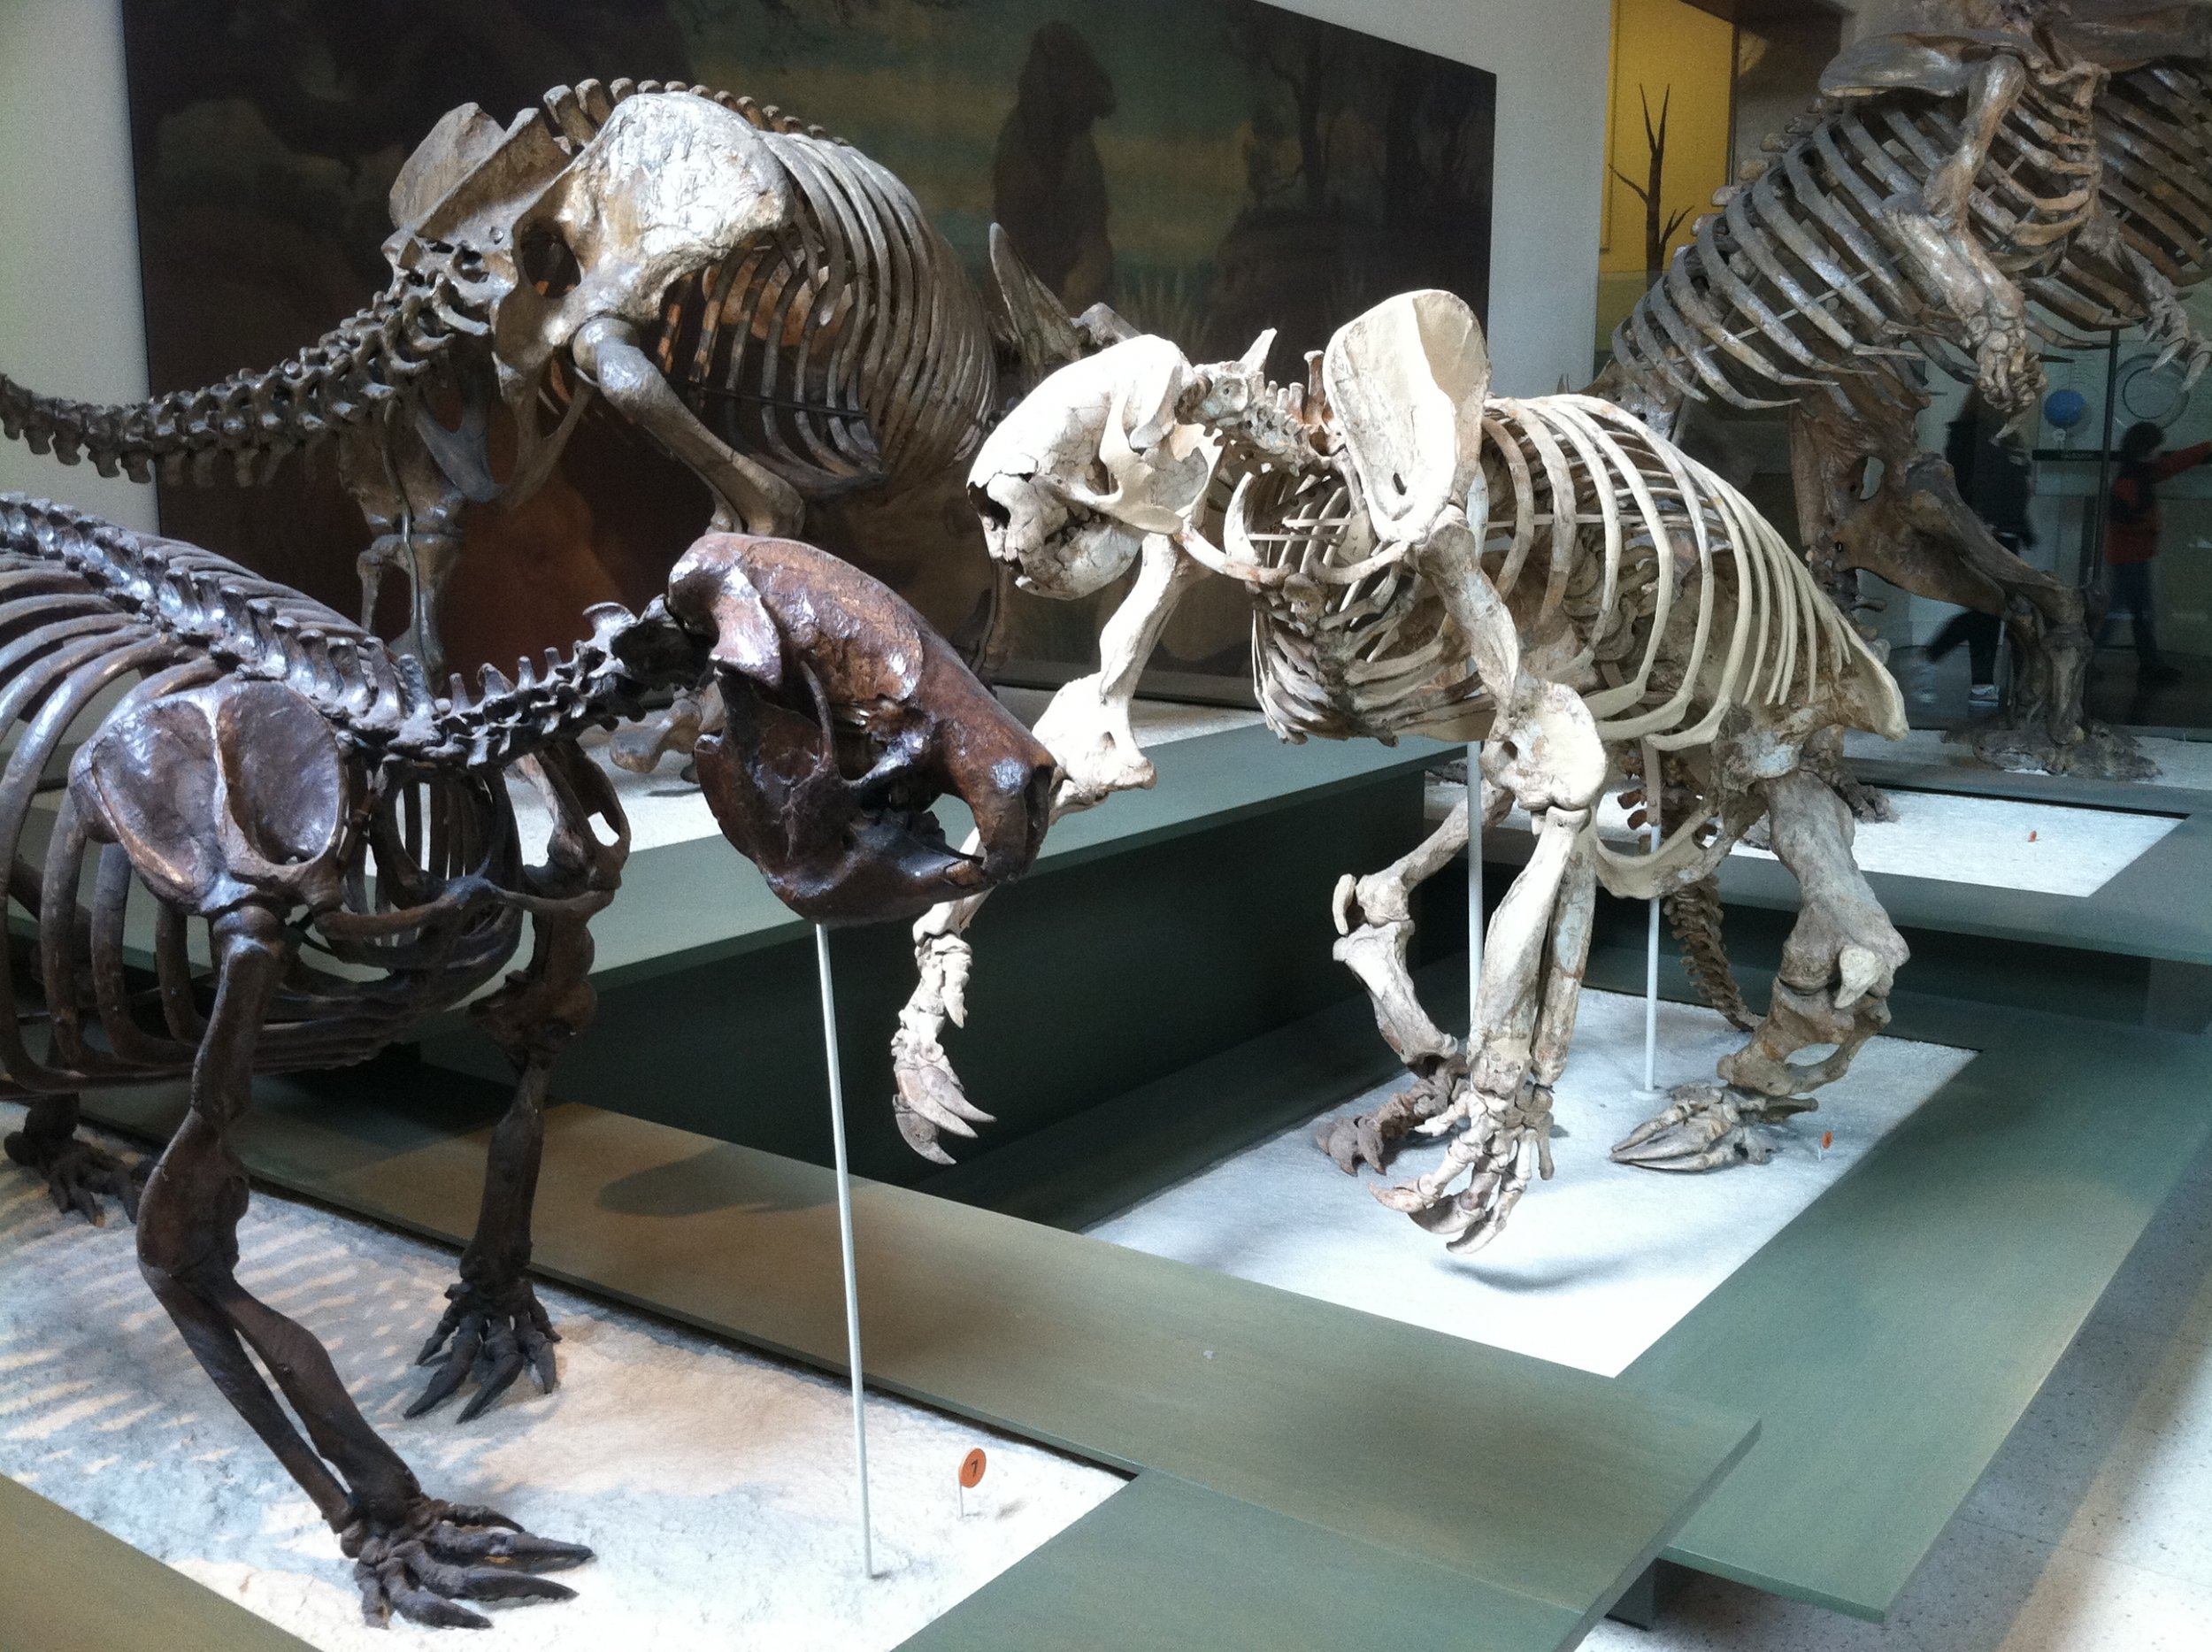 Ground sloths in a museum